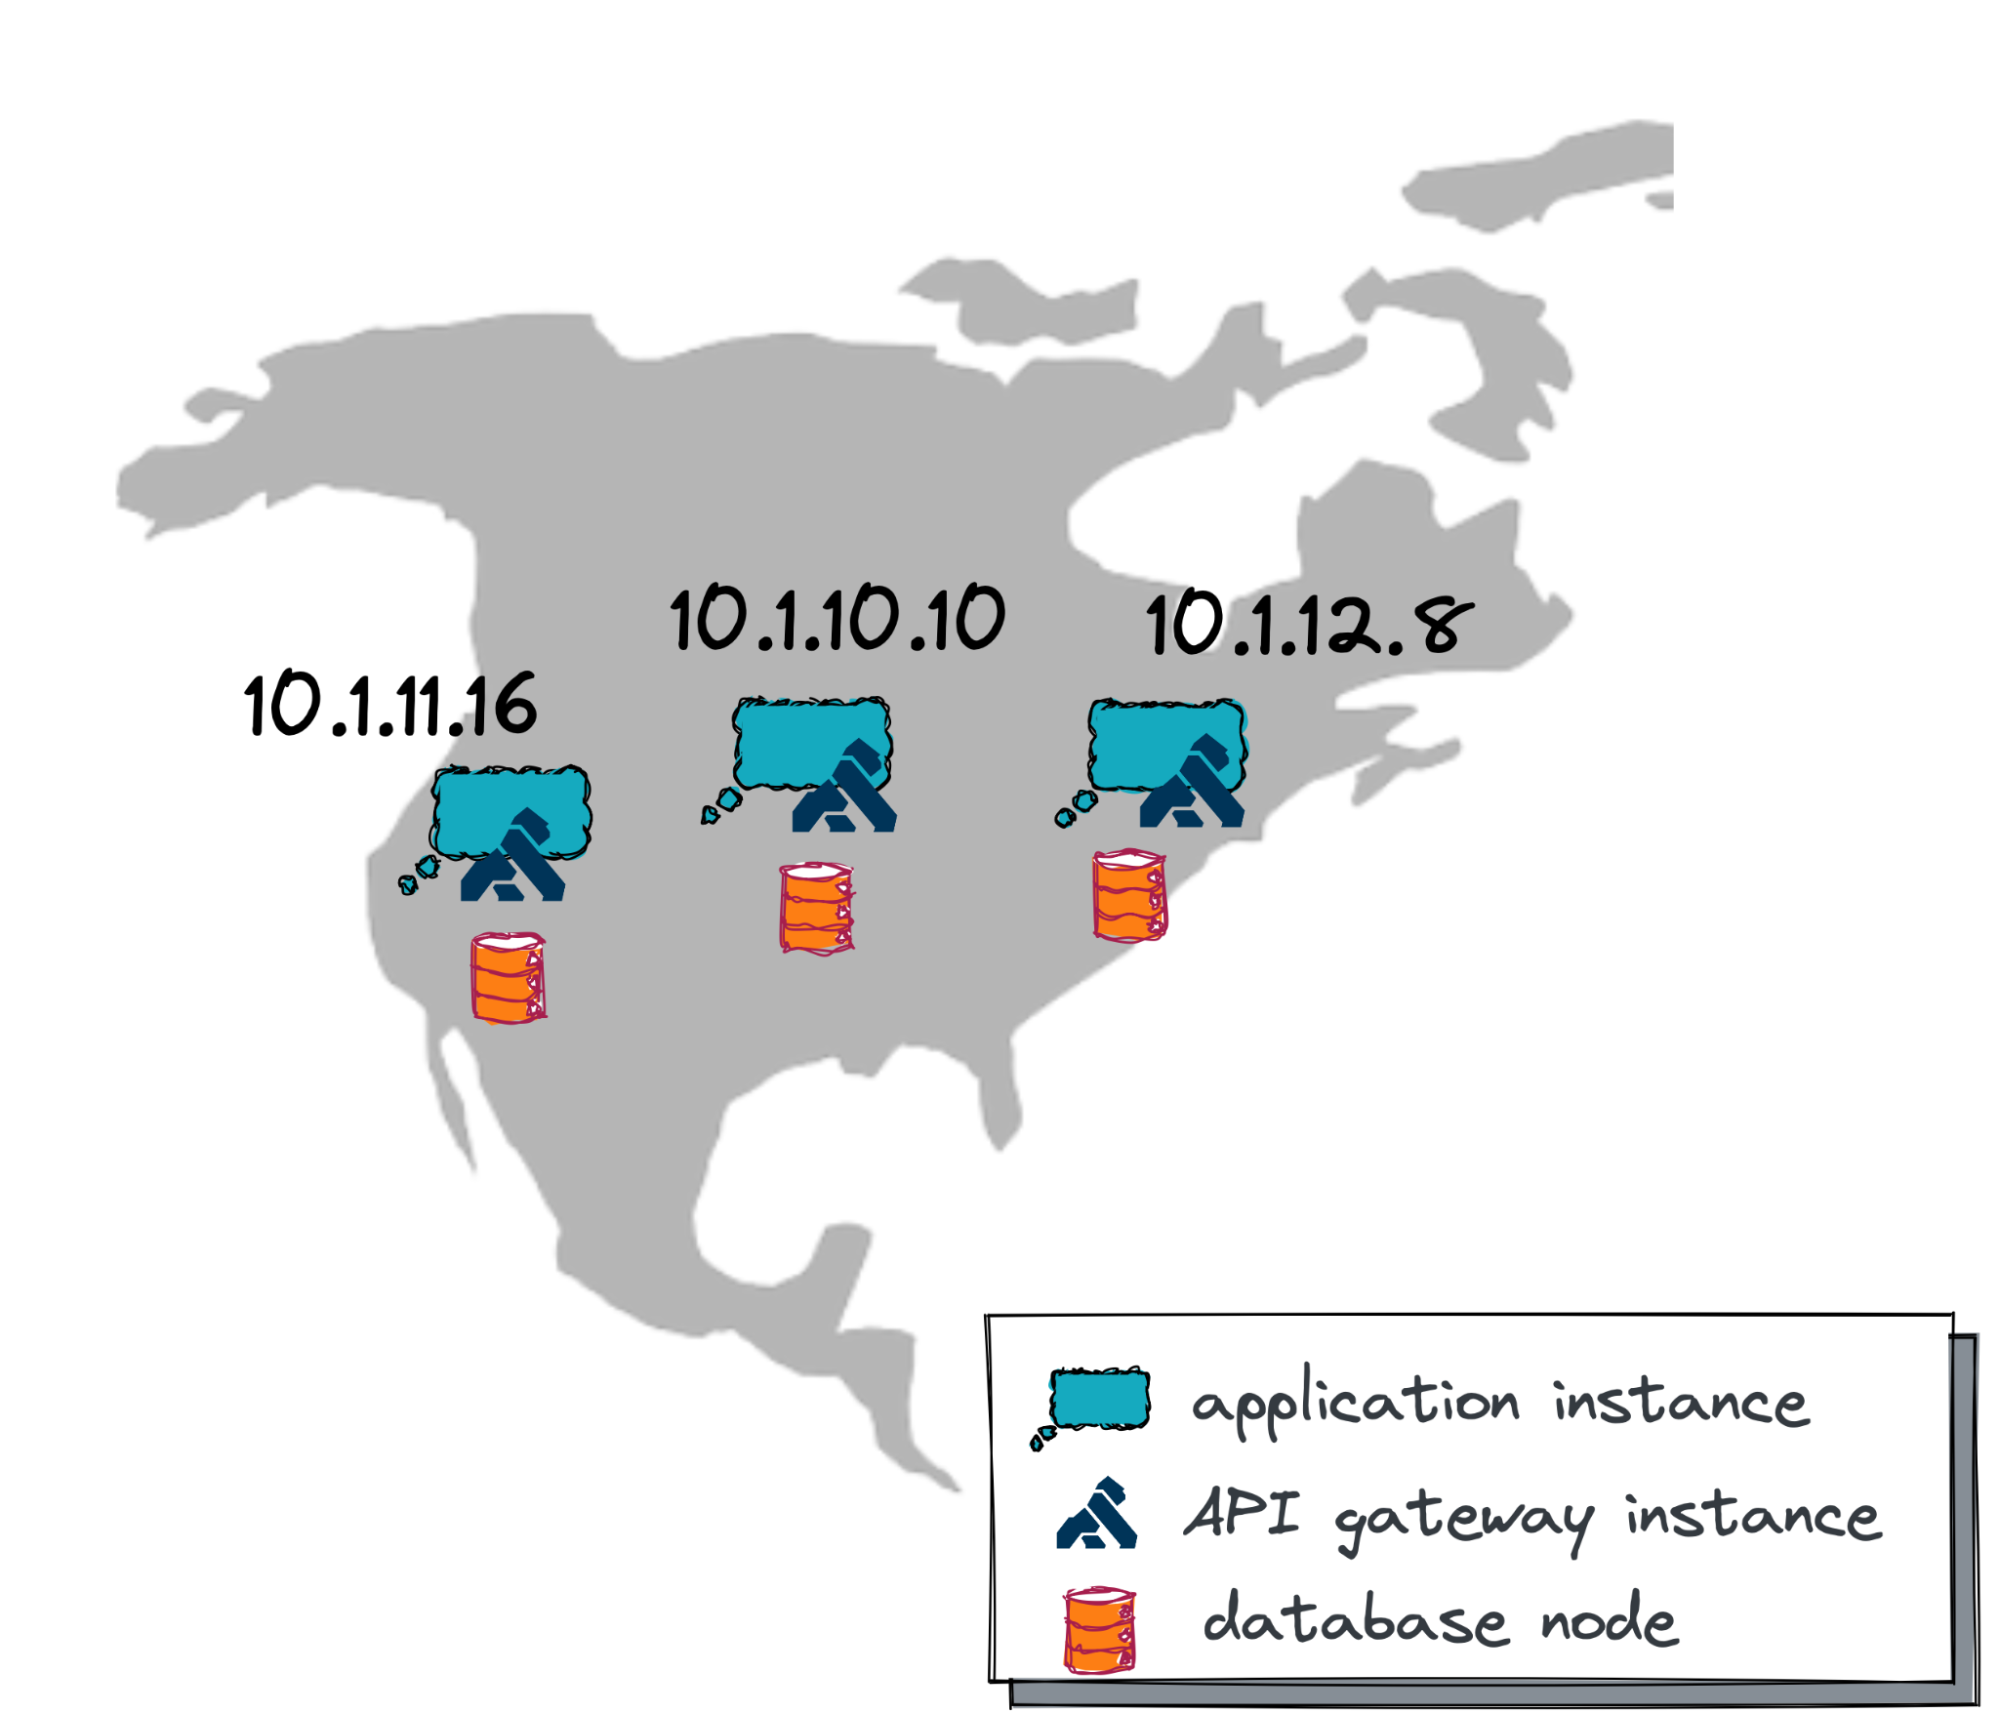 Standalone applications running in multiple regions